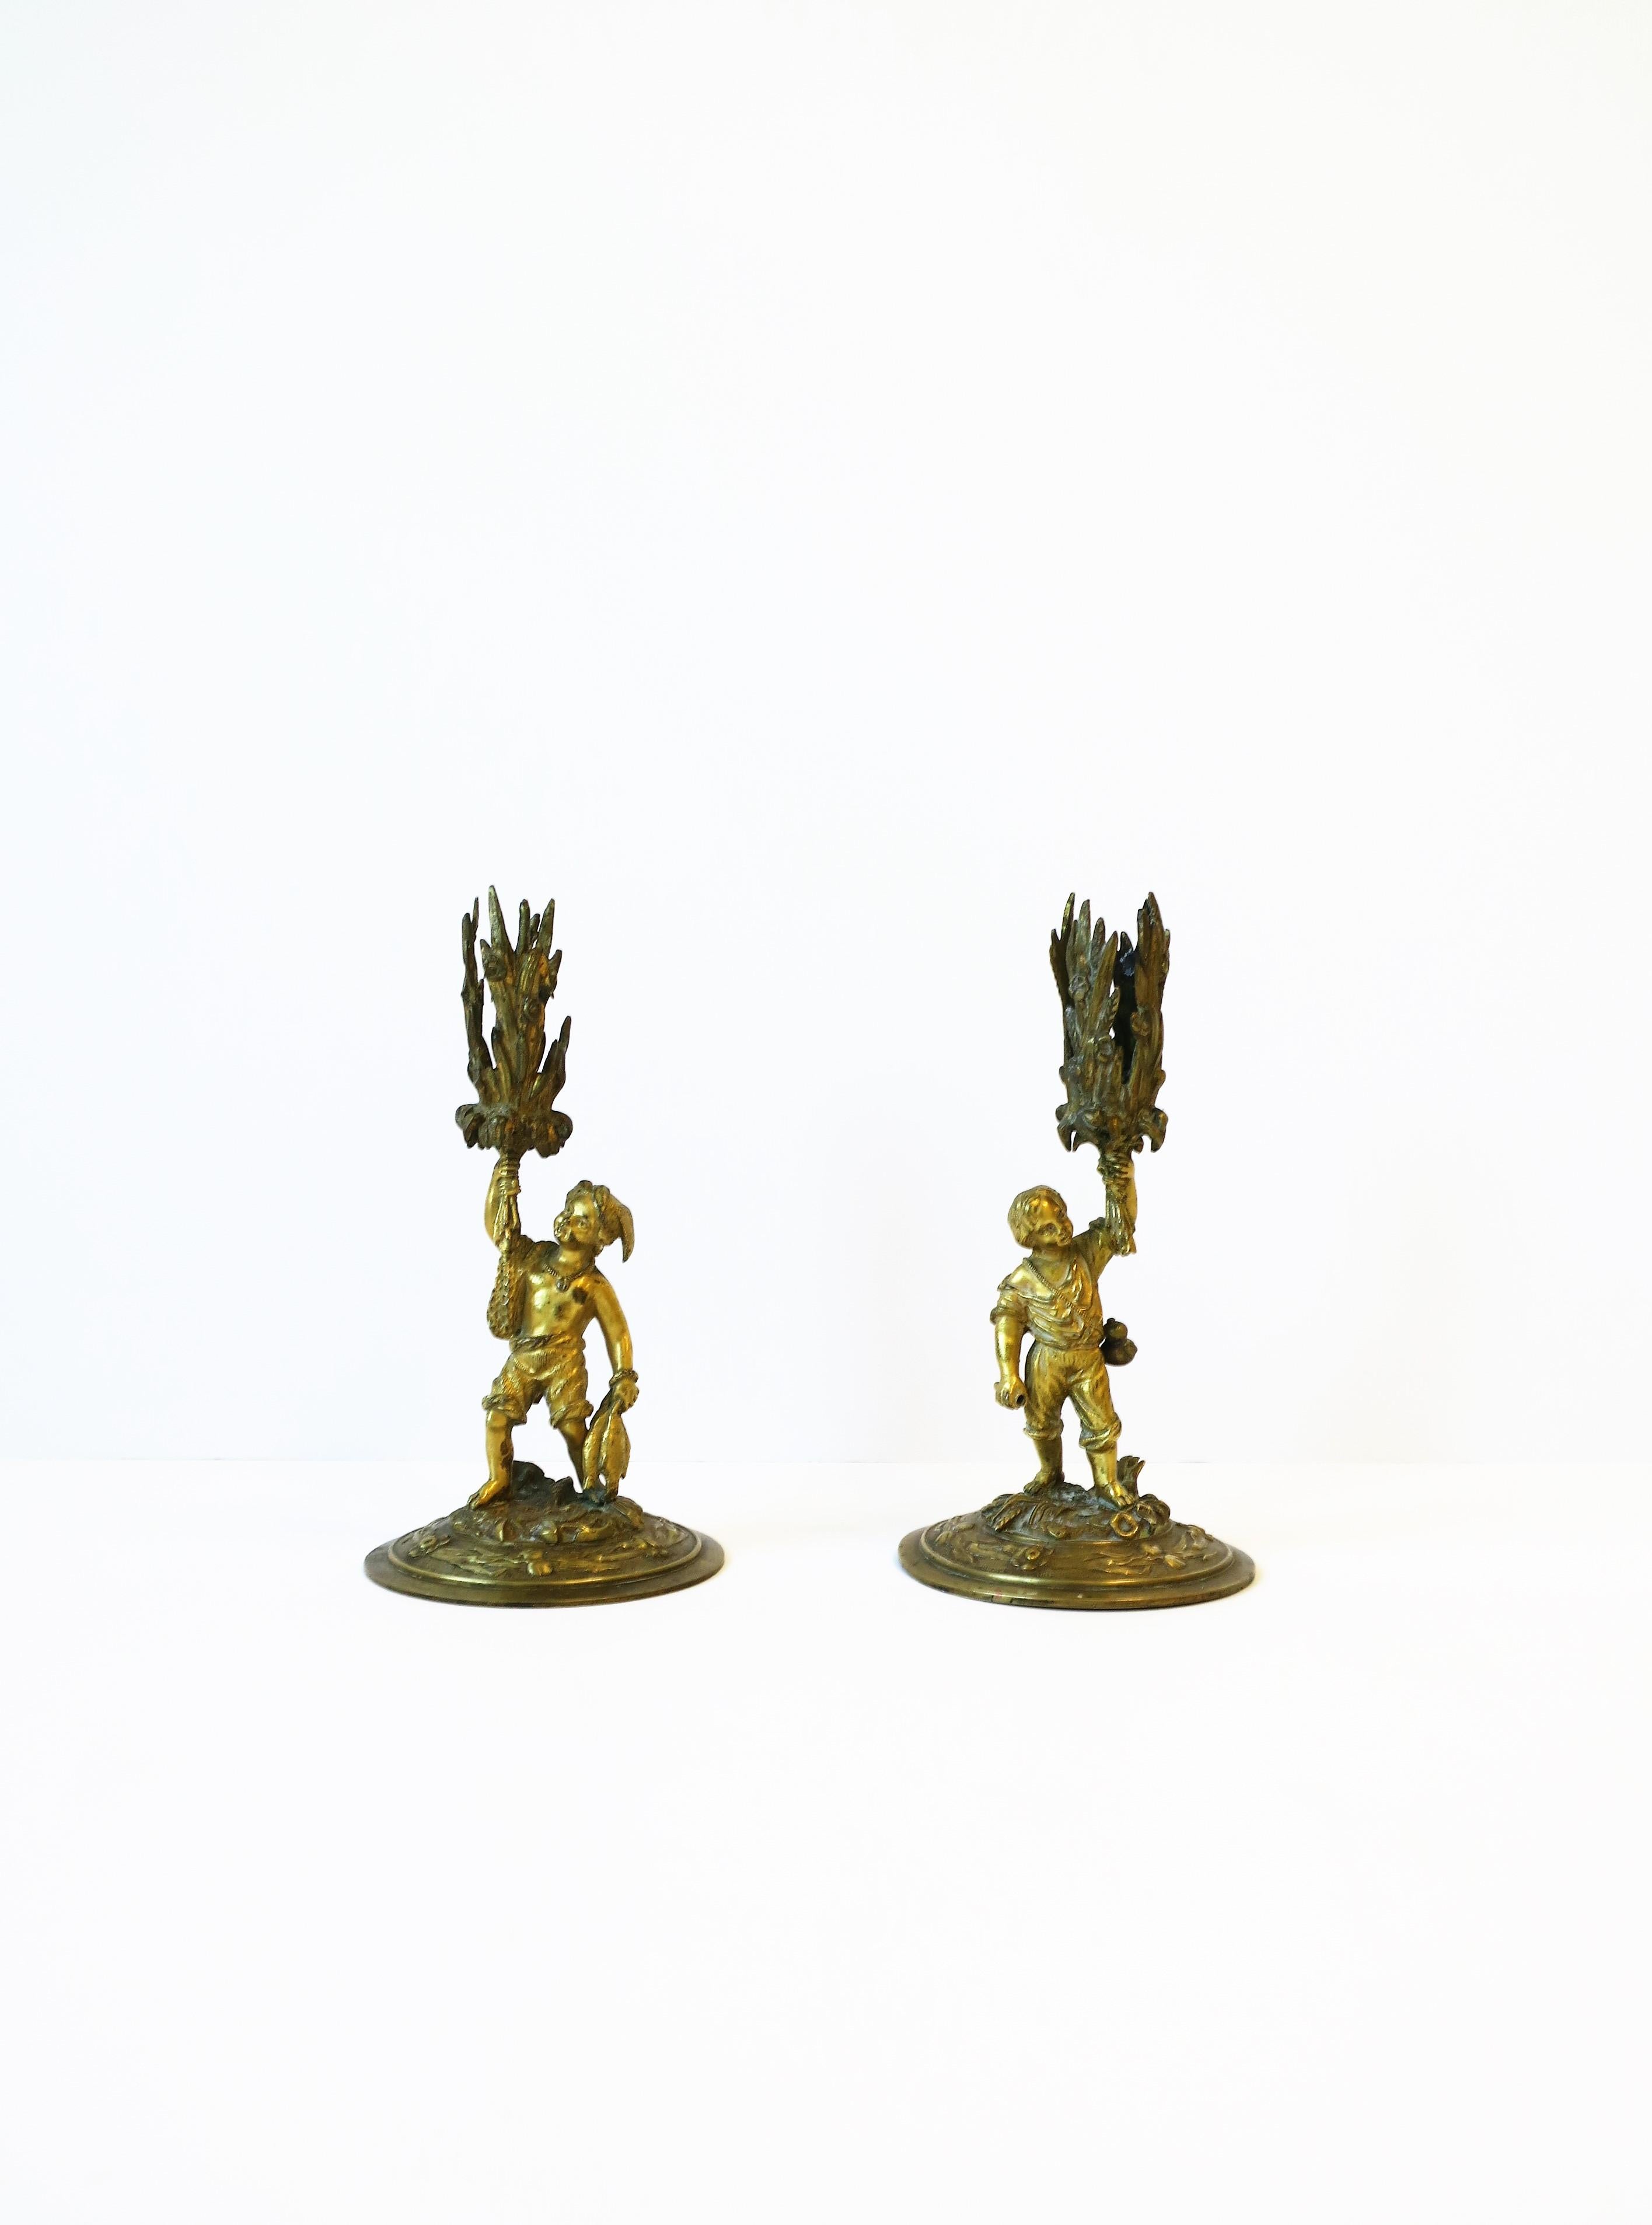 Neoclassical Bronze Male Sculptures Figurative Candlestick Holders, Pair, 19th Century